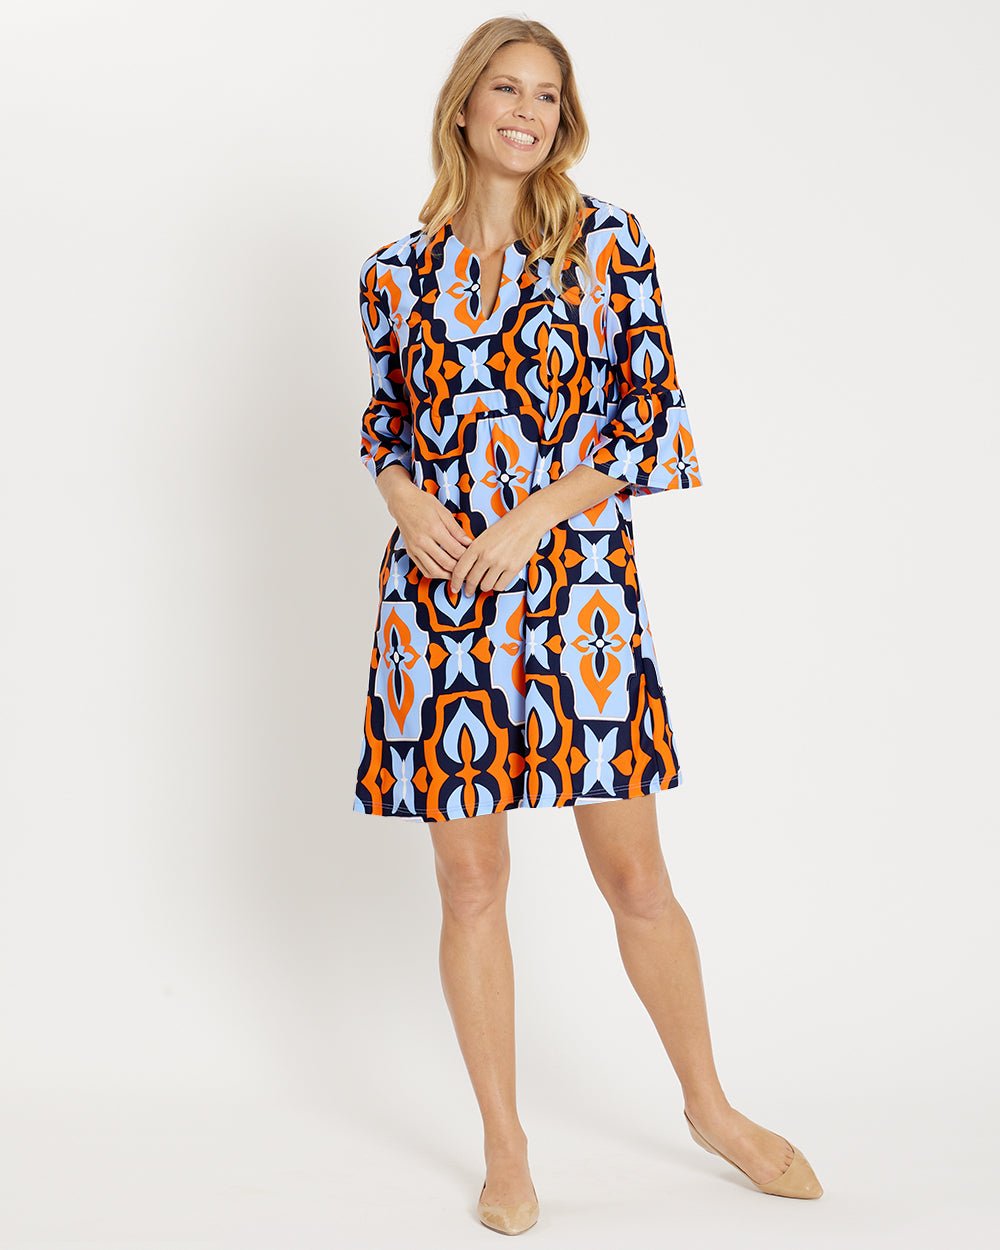 Jude Connally - Kerry Dress - Butterfly Tile Navy - Shorely Chic Boutique